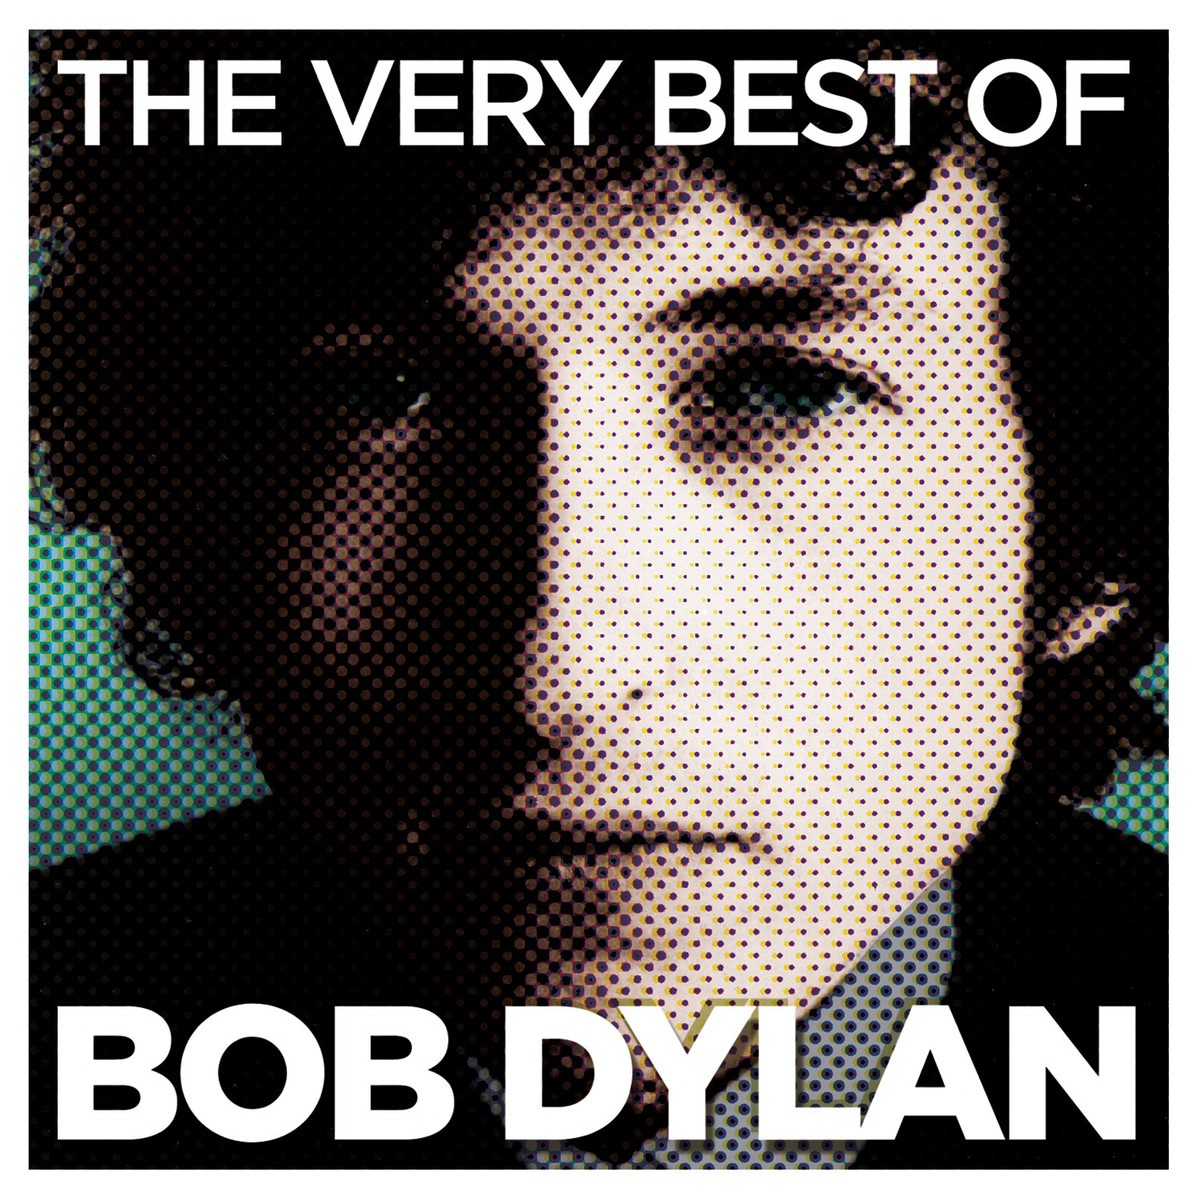 The Very Best of Bob Dylan